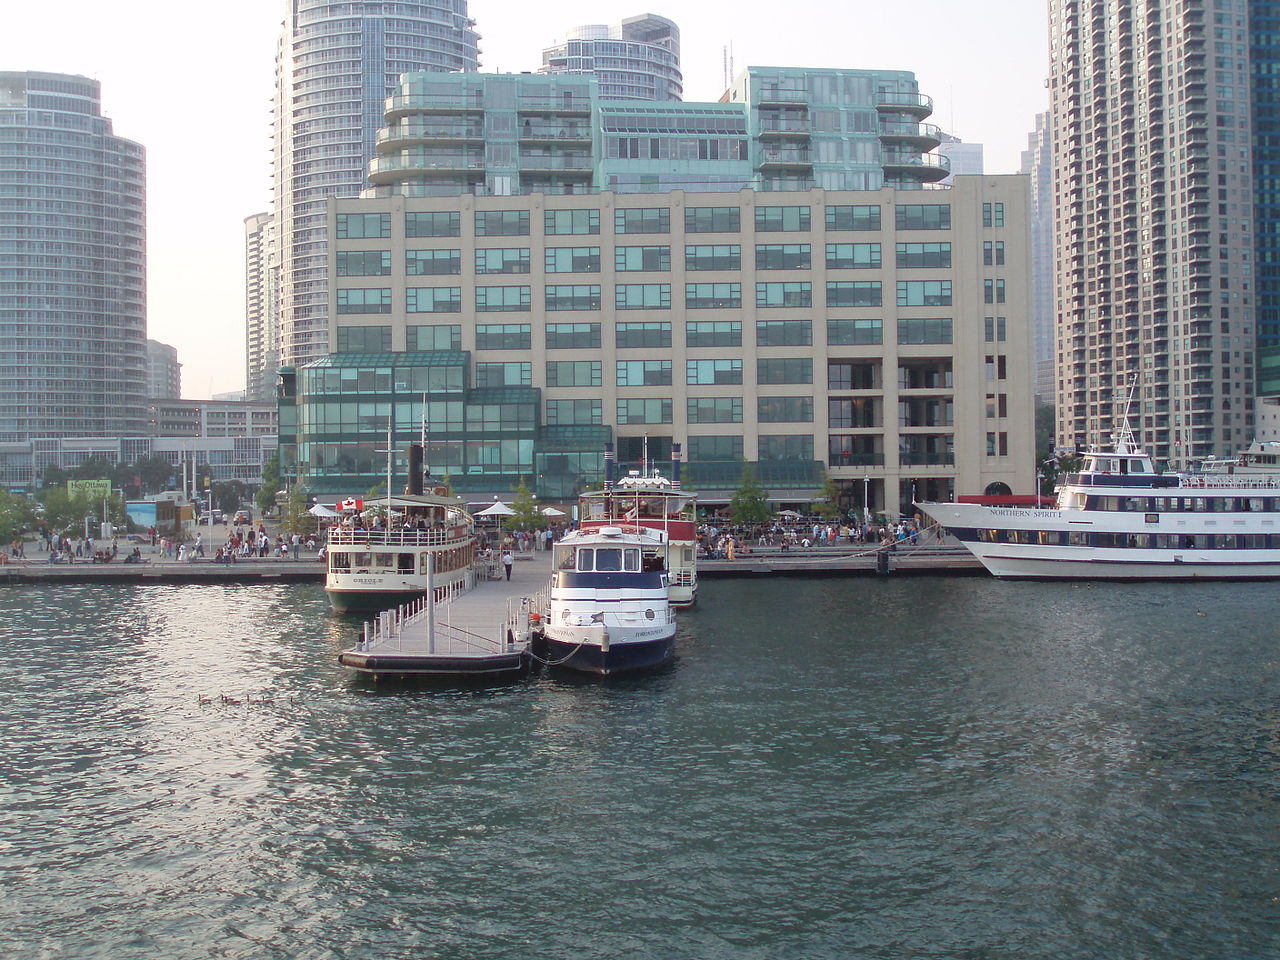 Another image of Toronto Harbour, this one showing ferries and people on the boardwalk.